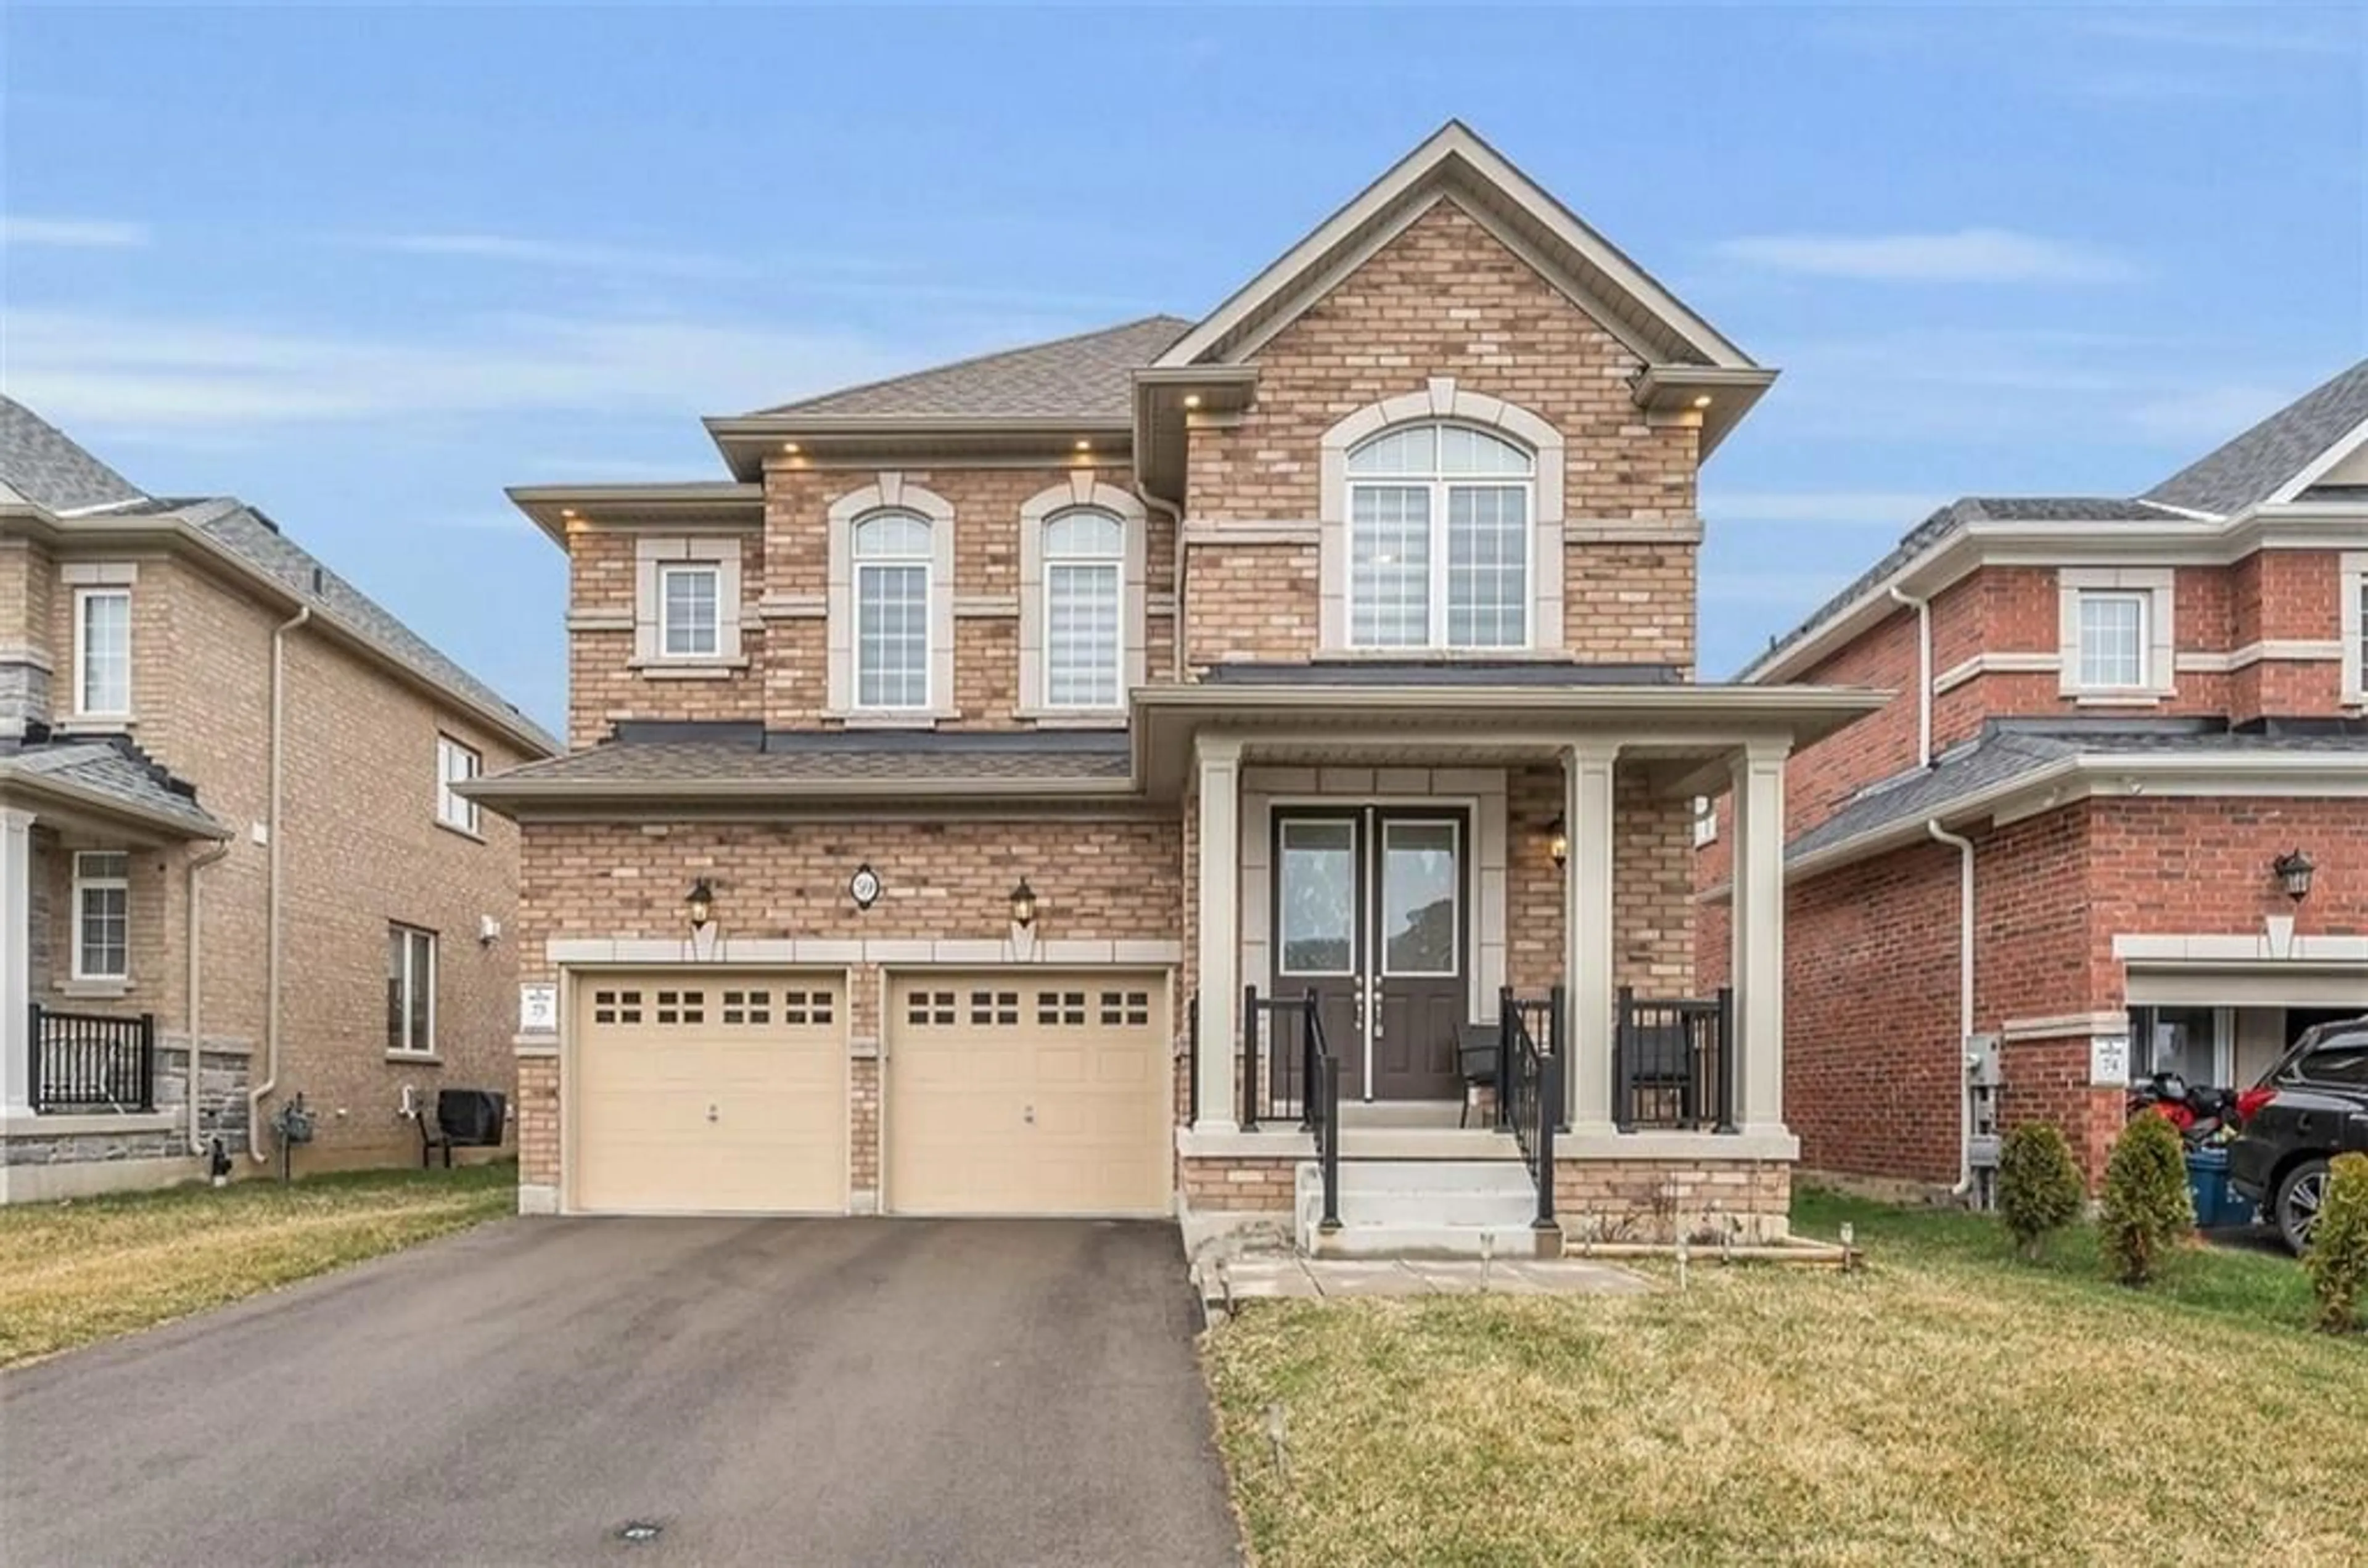 Home with brick exterior material for 59 FINDLAY Dr, Ancaster Ontario L9K 0H5